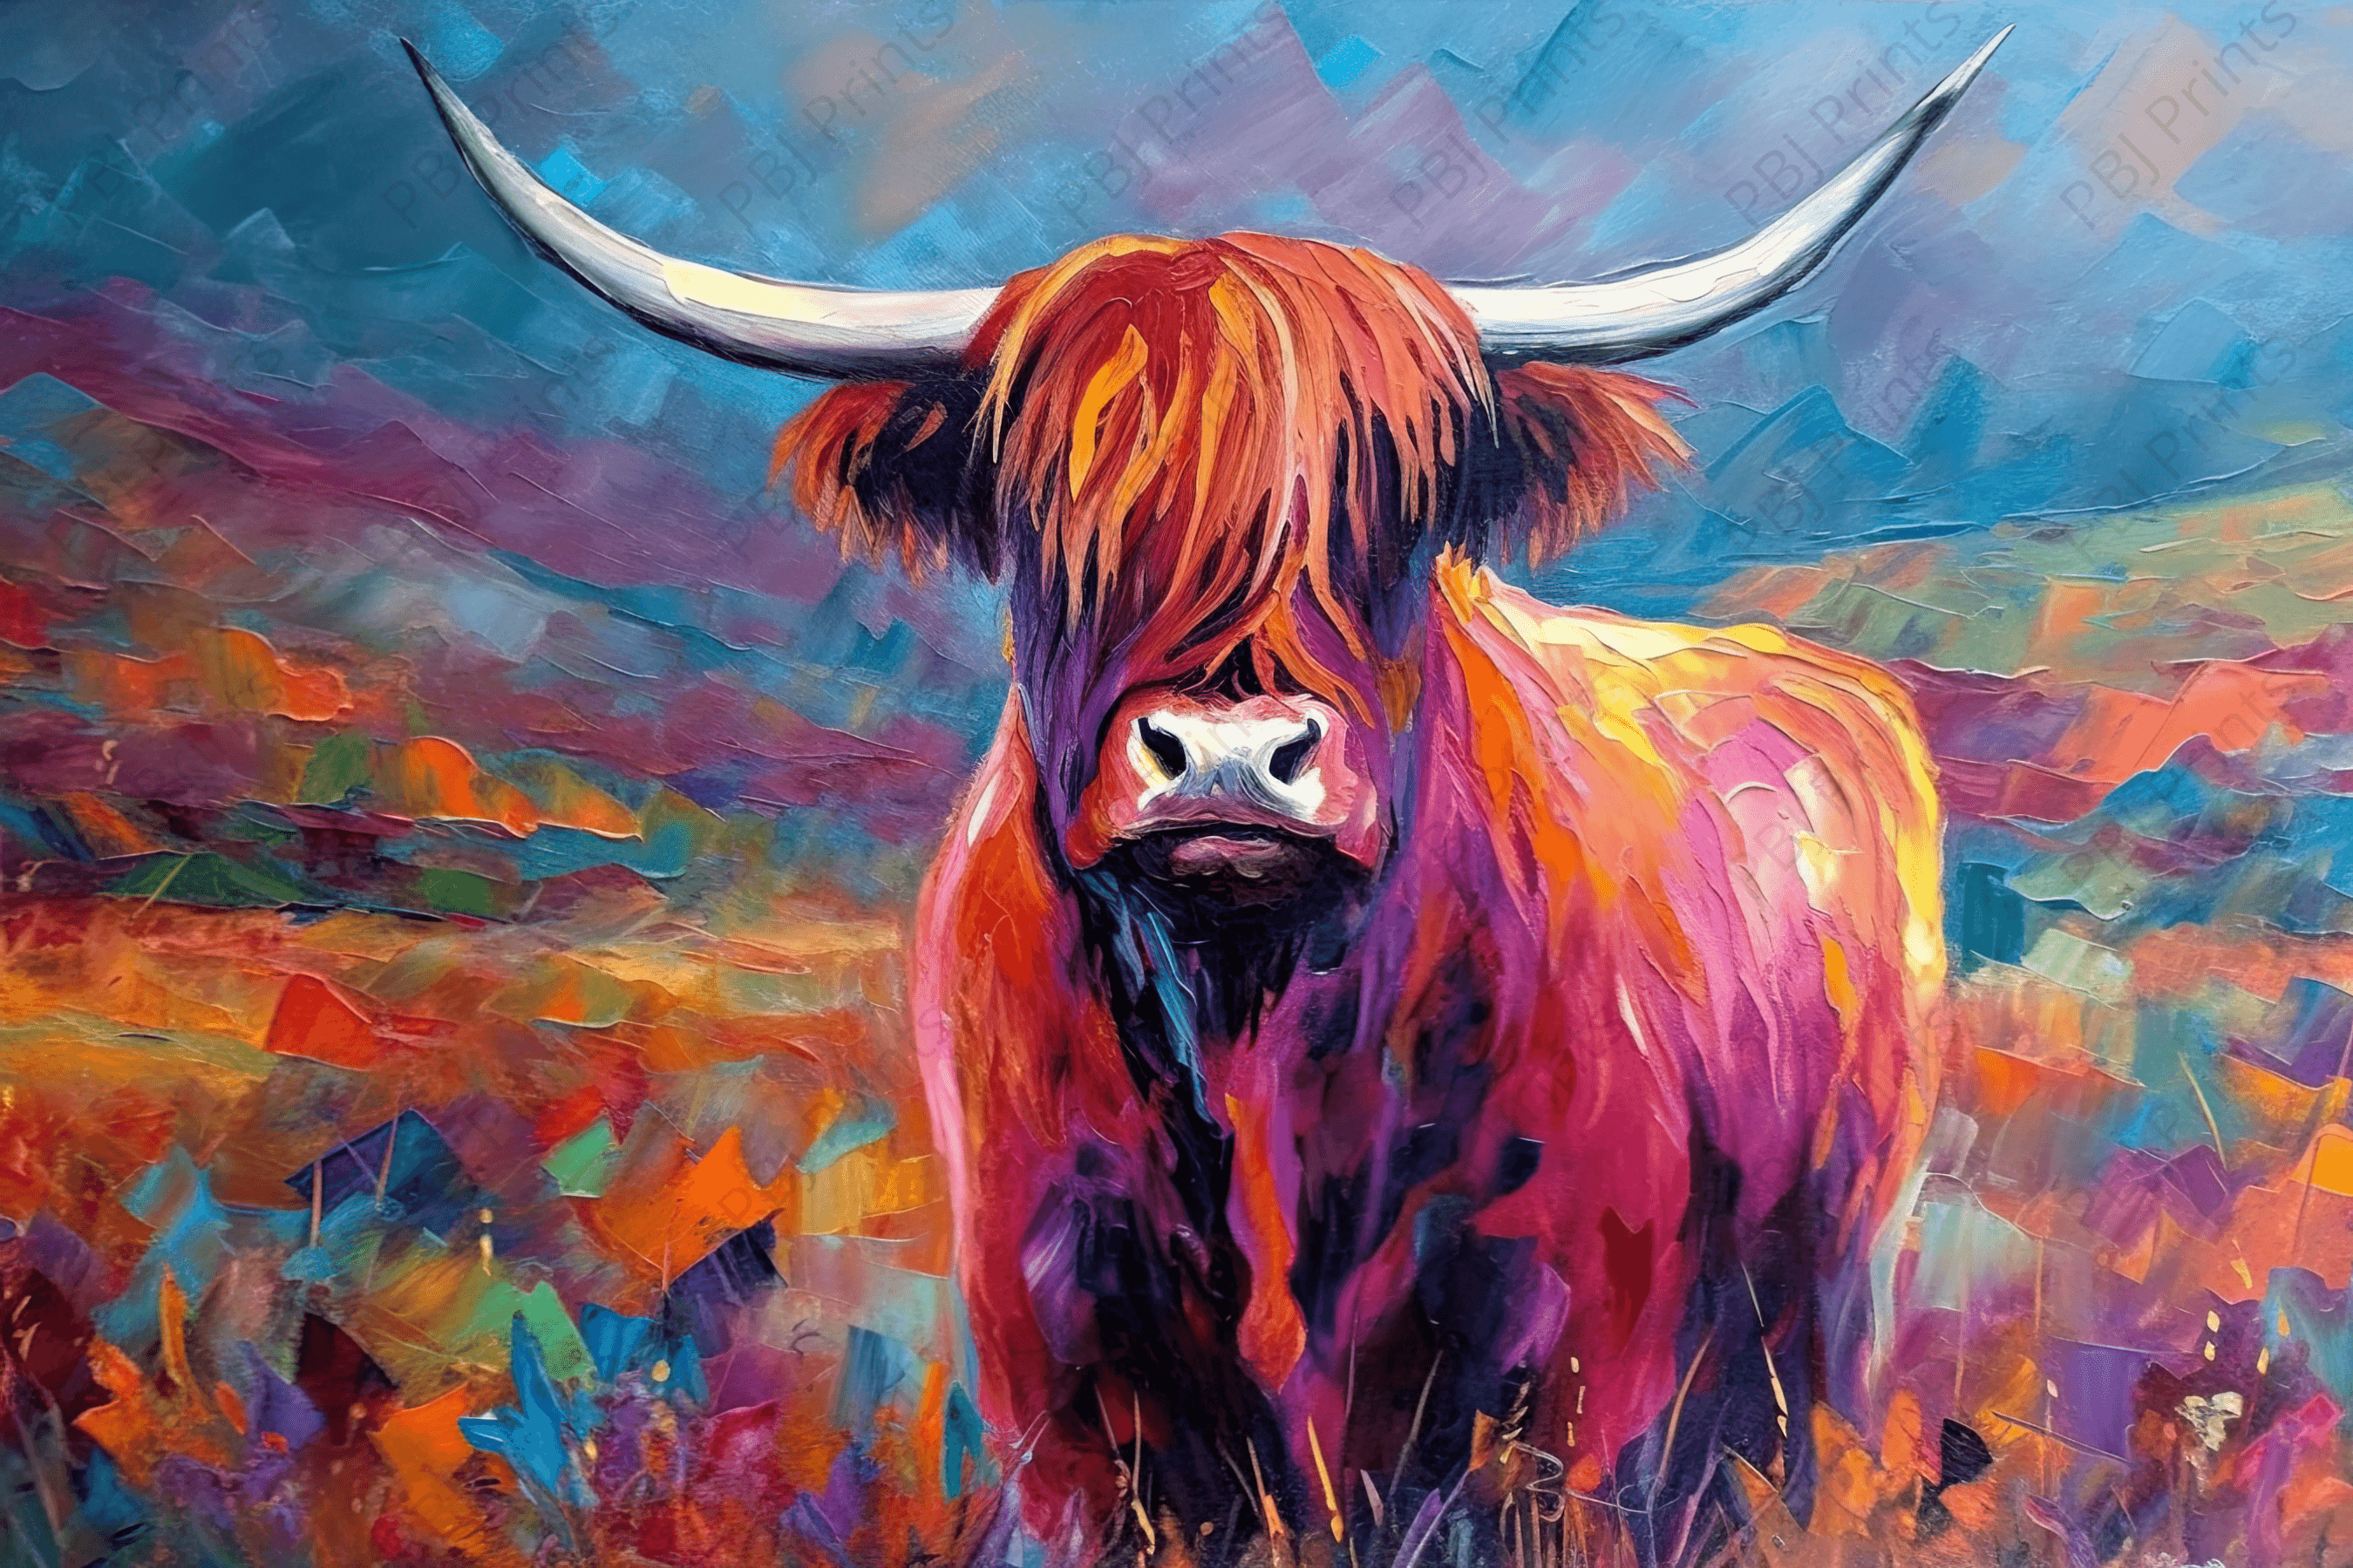 Agnus the Highland Cow - Artist by Whimsykel Designs - Art Prints, Decoupage Rice Paper, Flat Canvas Prints, Giclee Prints, Photo Prints, Poster Prints